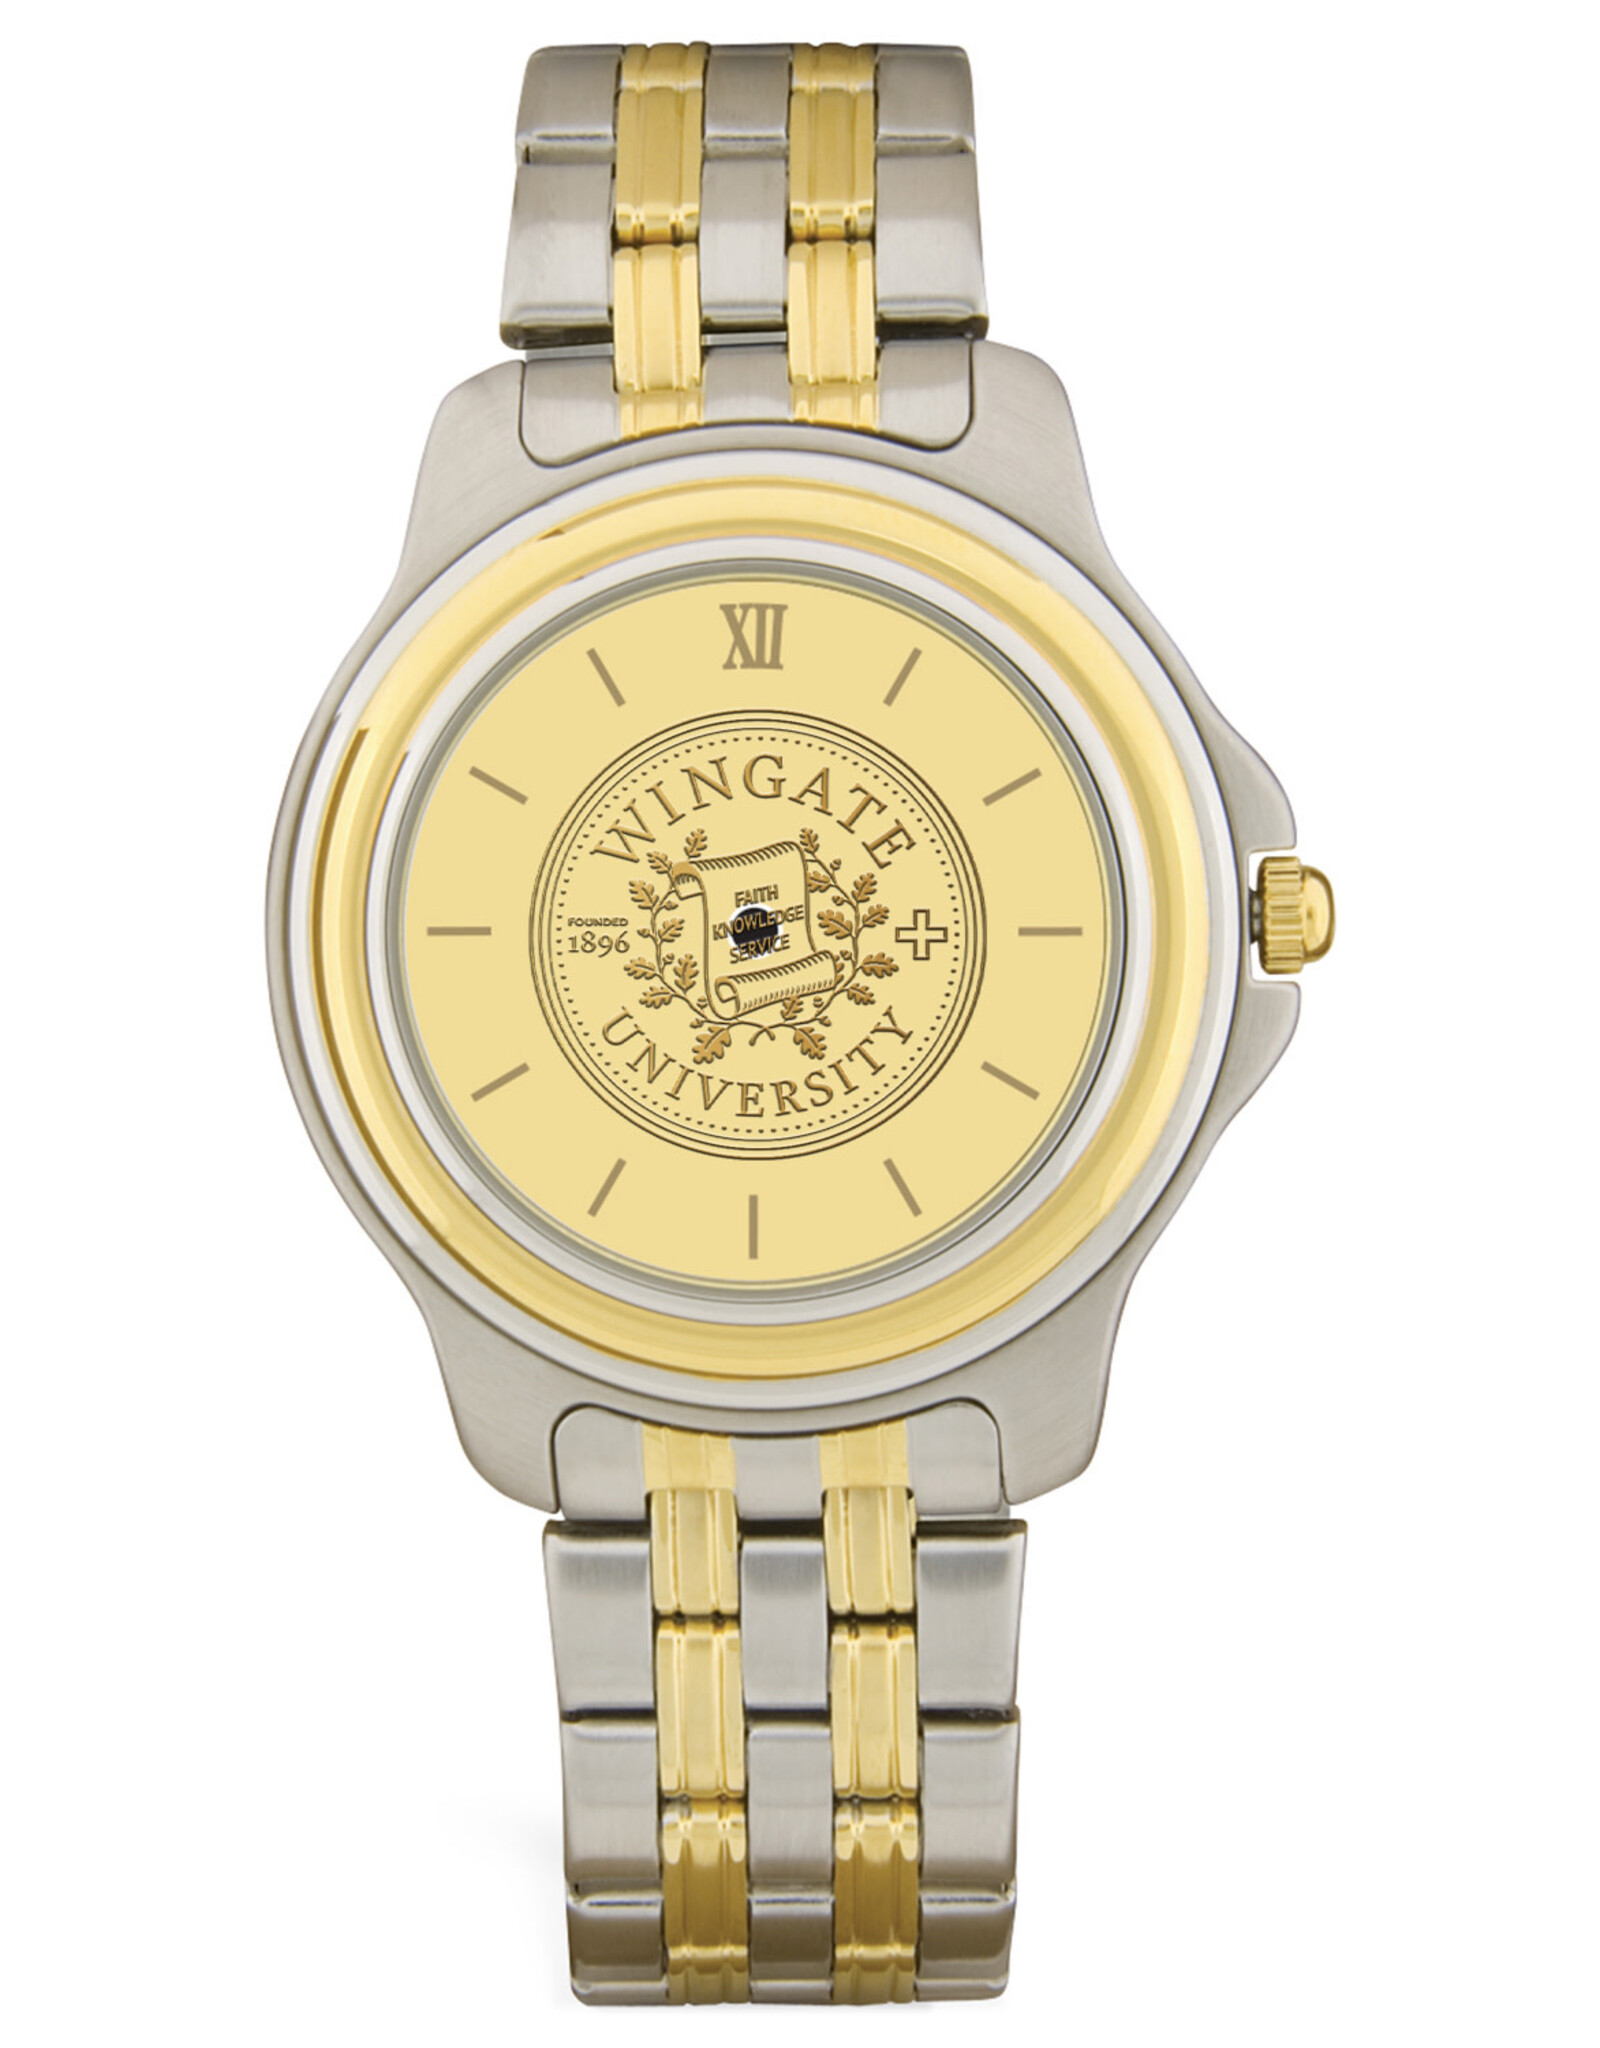 DROP SHIP ONLY Men's Two-tone Wristwatch with Gold Wingate Seal Face (ONLINE ONLY)